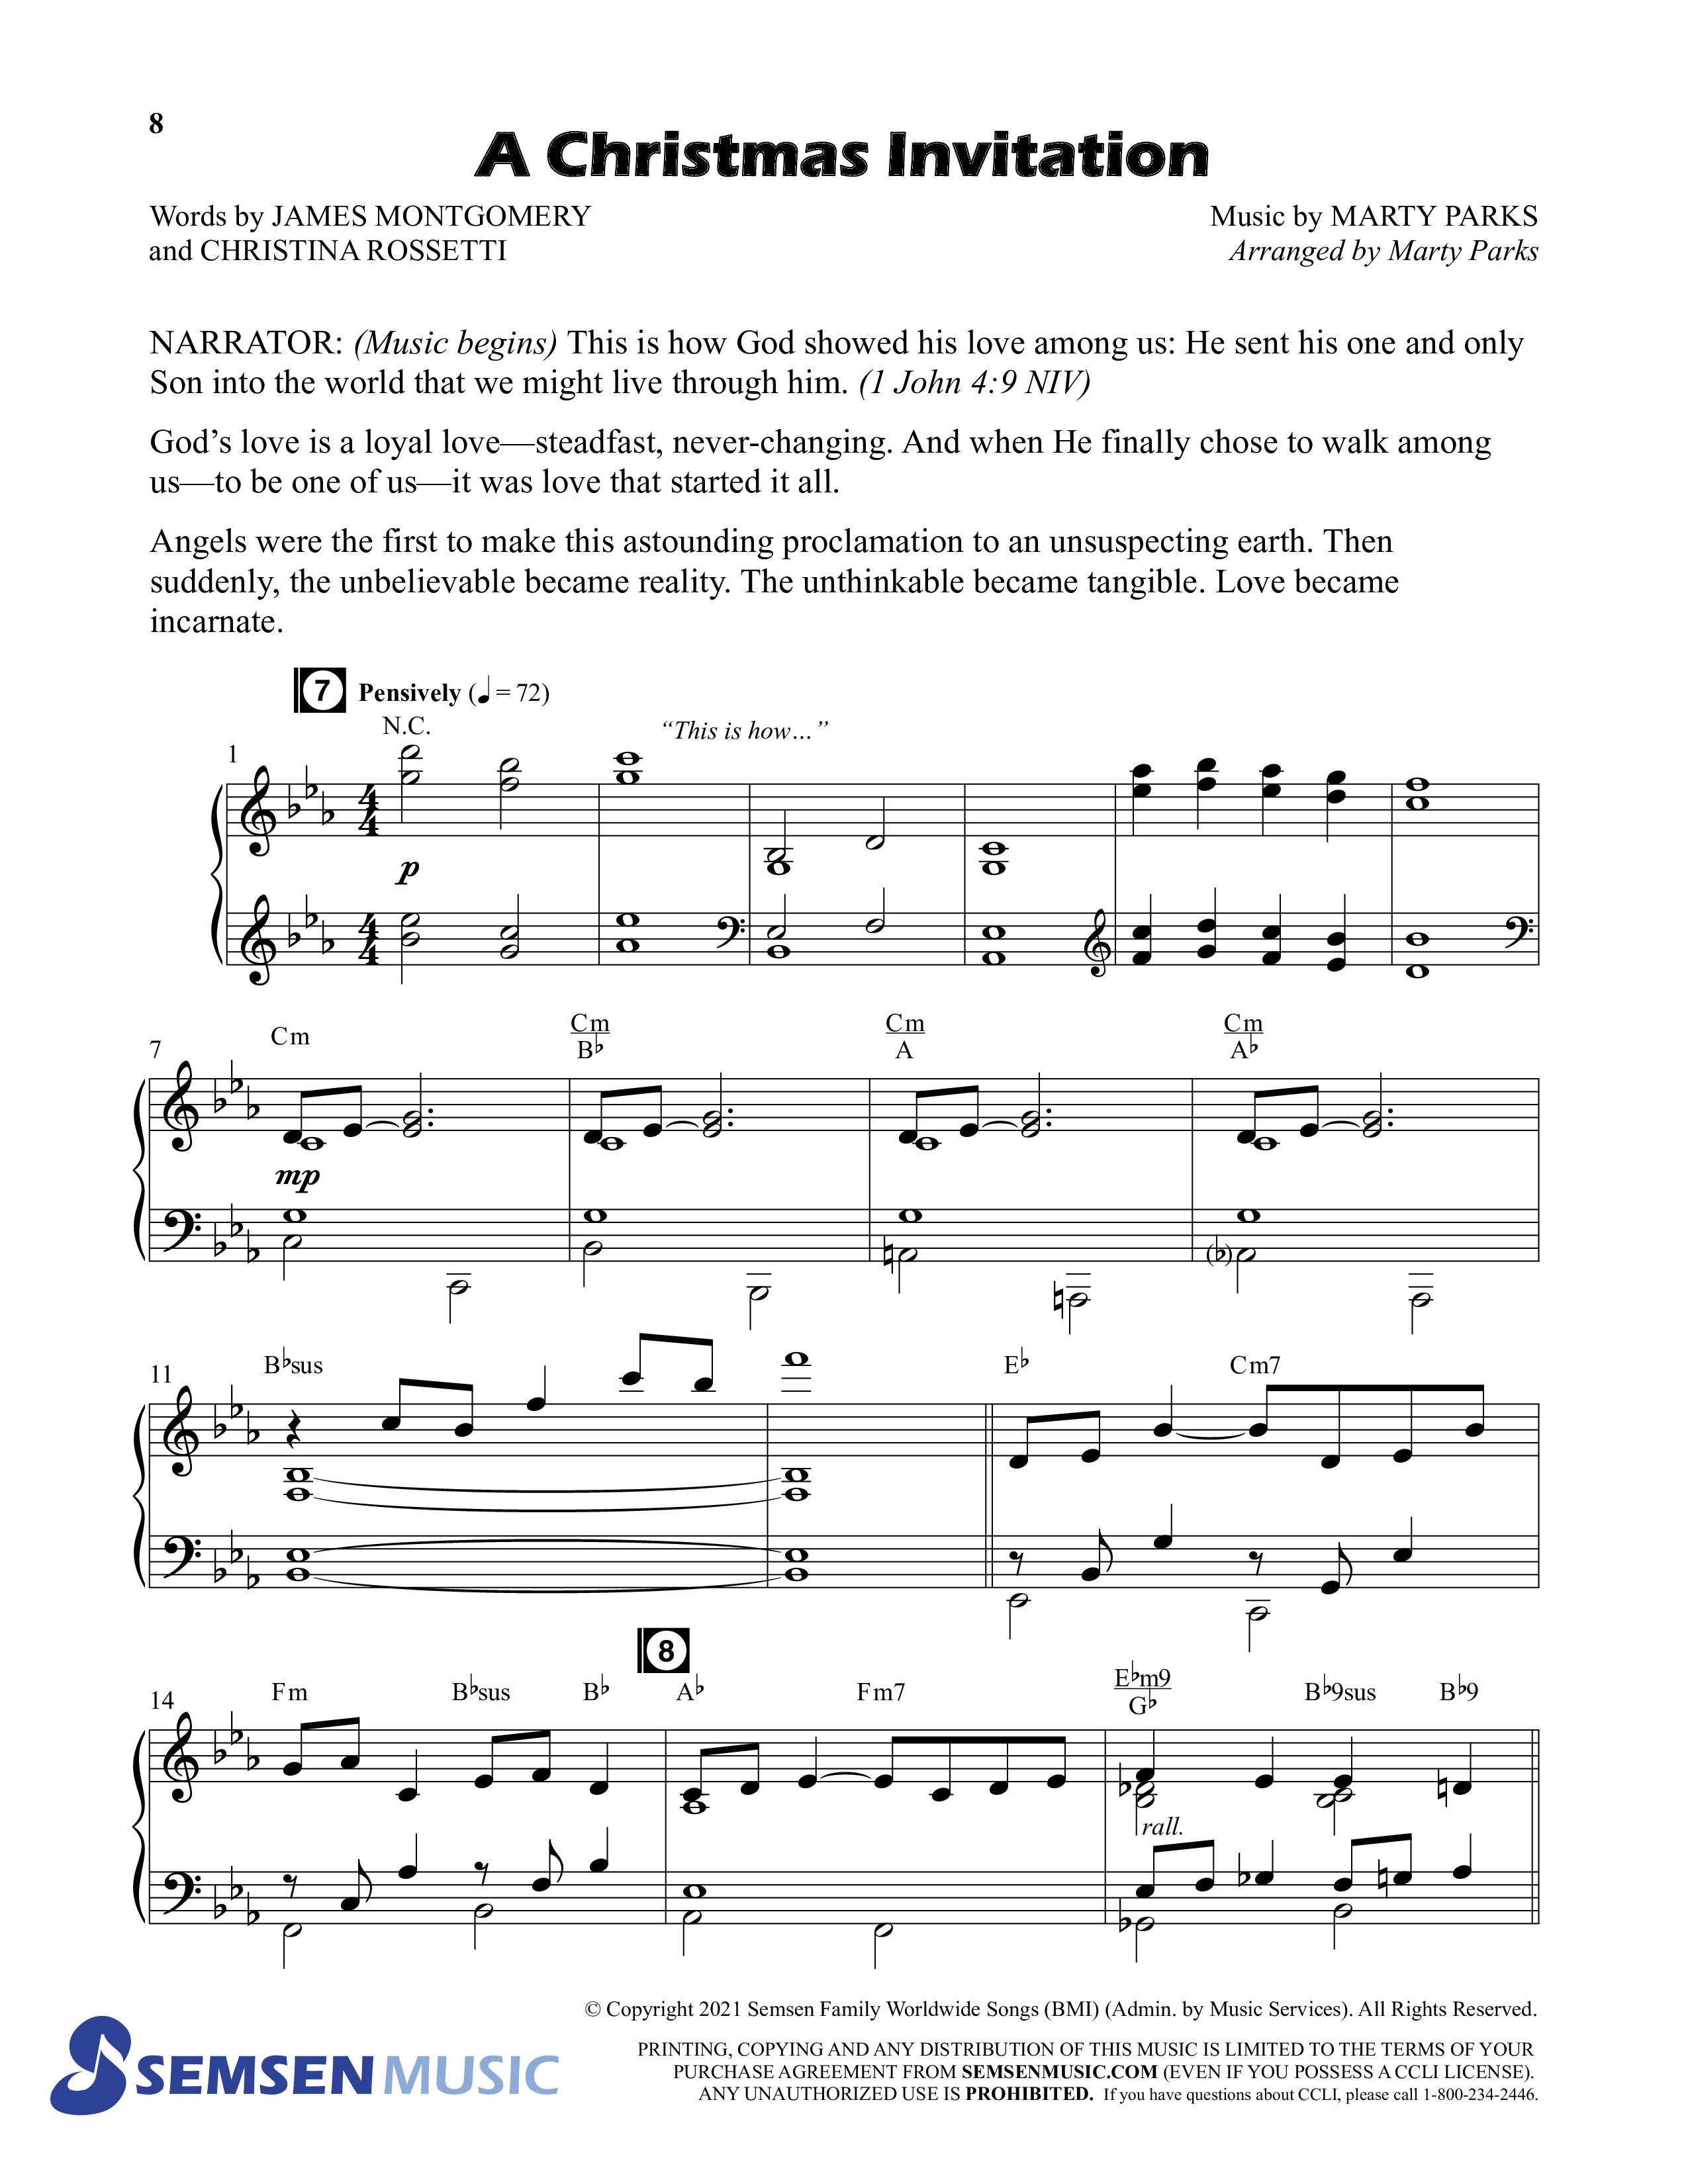 Christmas: The Love Of God (5 Song Choral Collection) Song 2 (Piano SATB) (Semsen Music / Arr. Marty Parks)